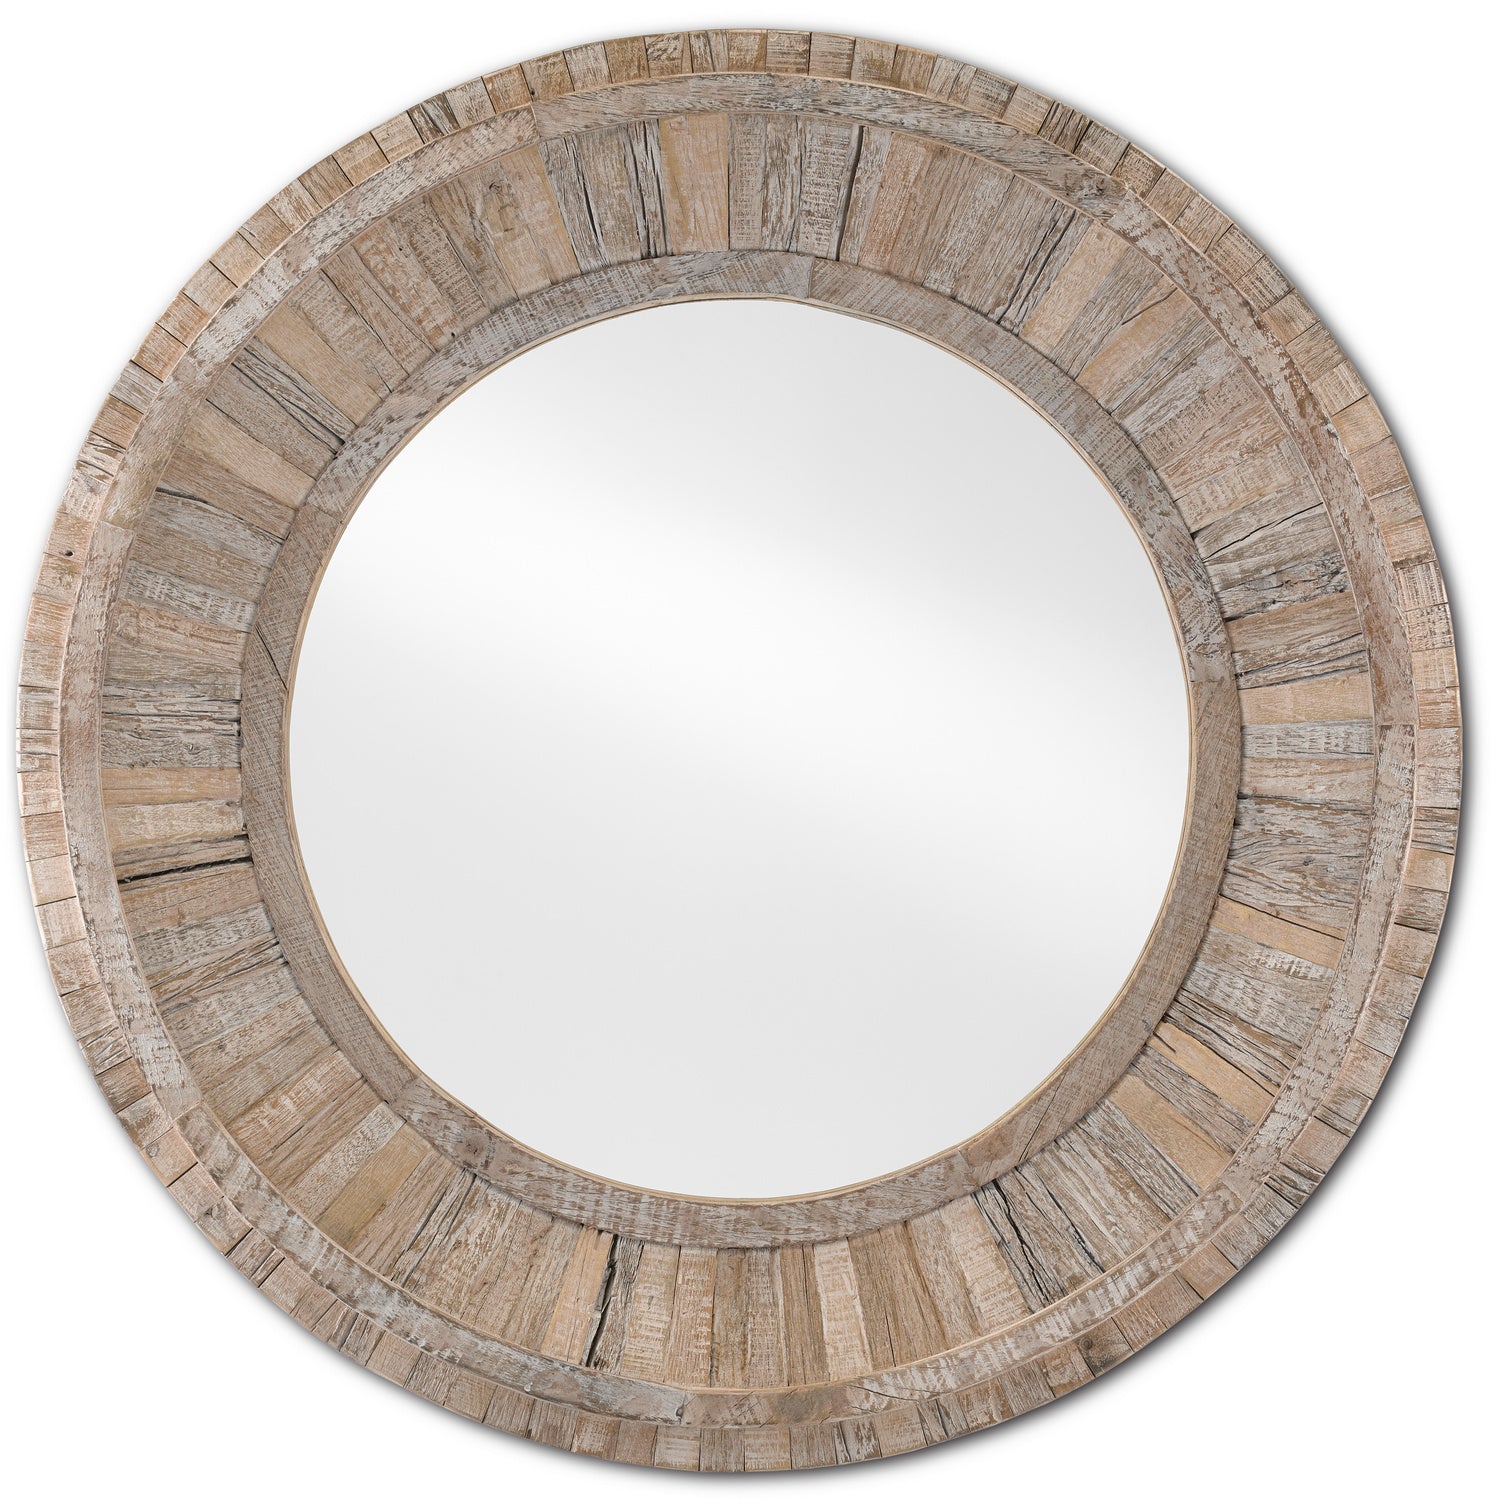 Mirror from the Kanor collection in Whitewash/Mirror finish